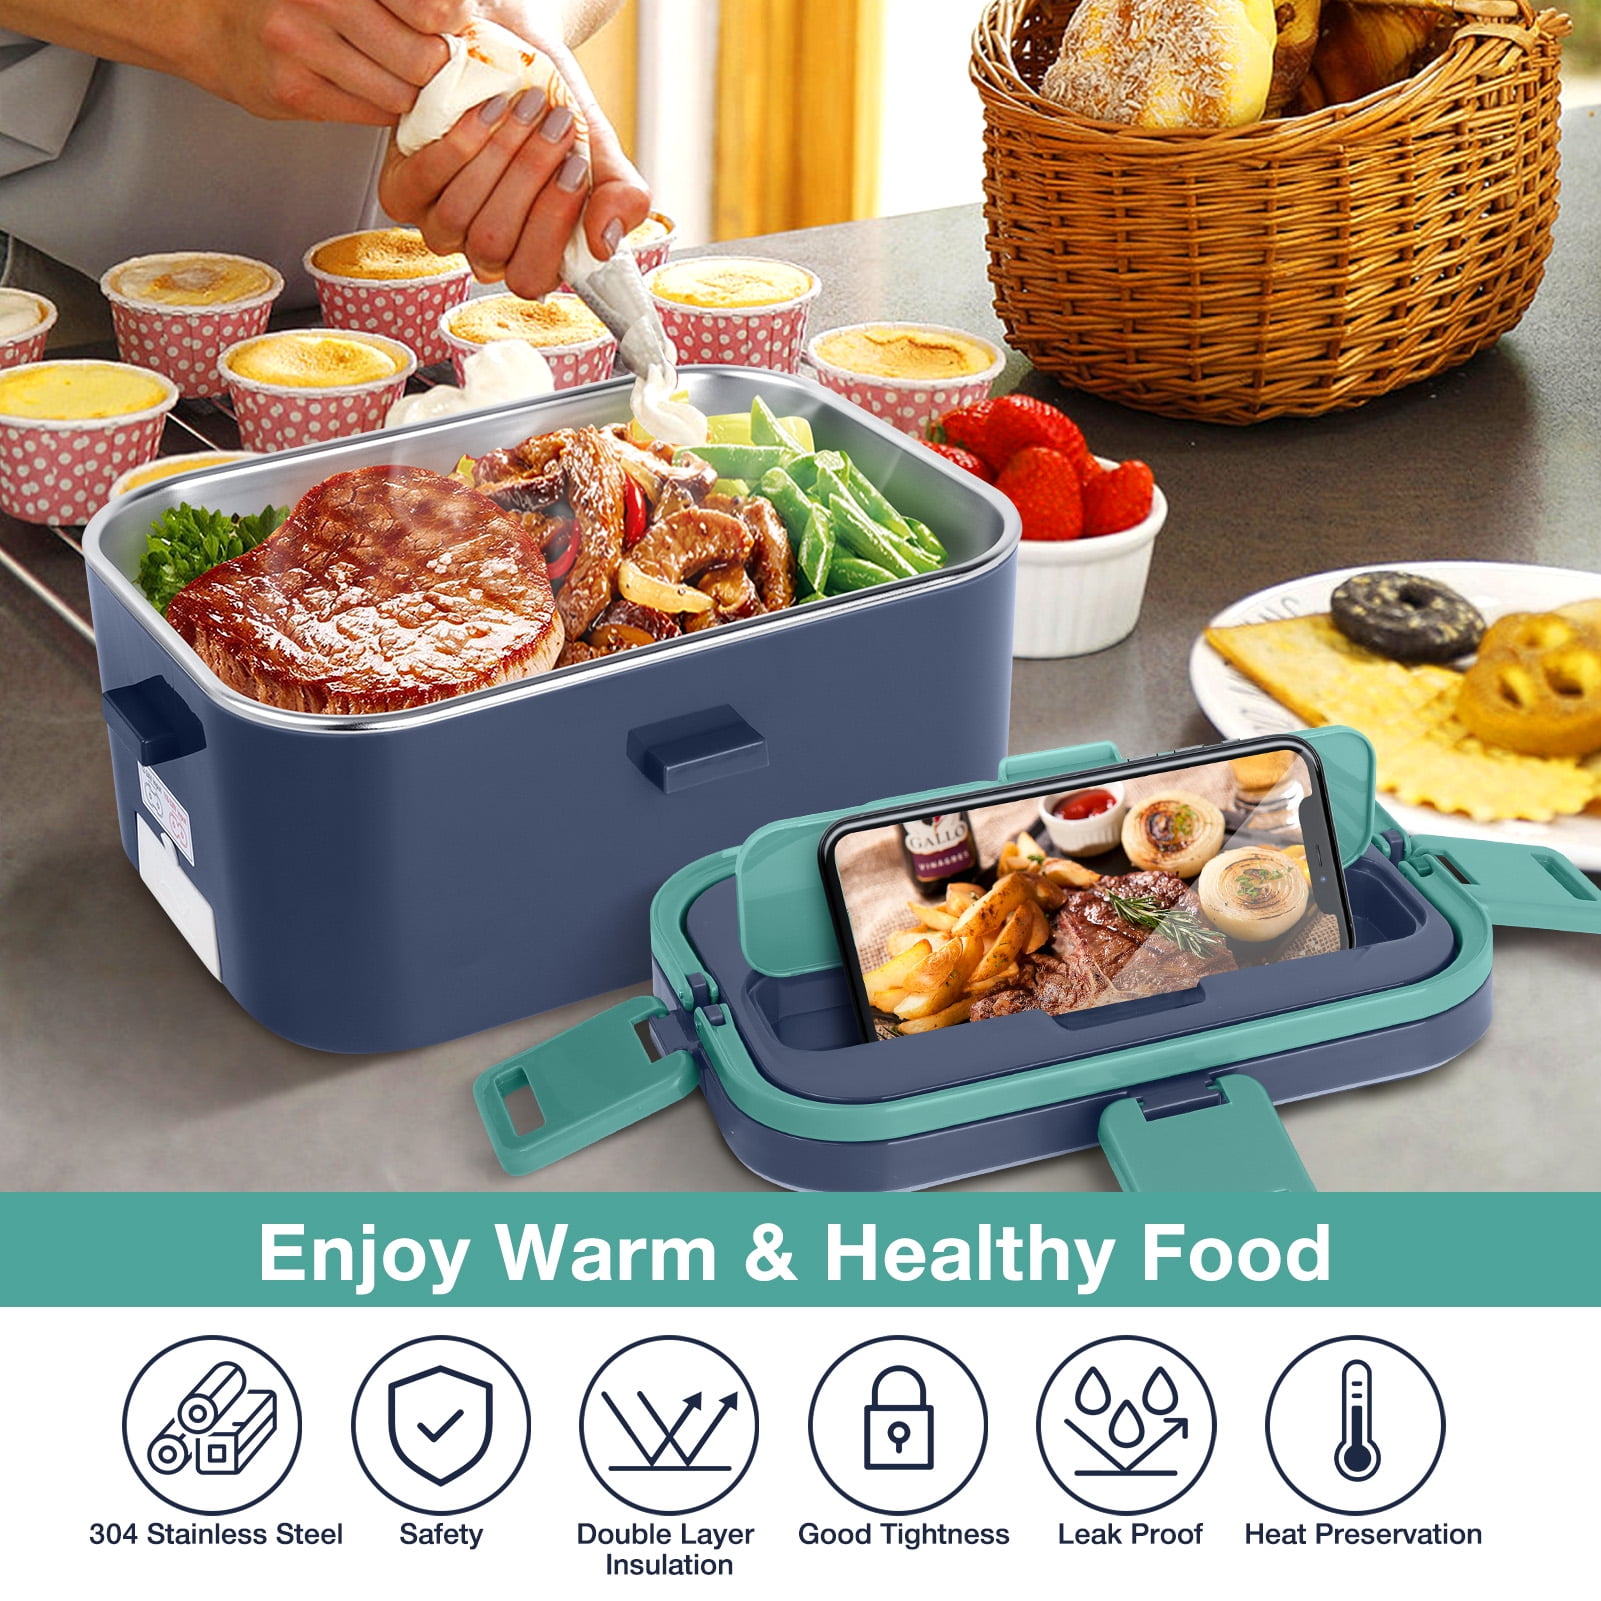 Lelinta 12V Portable Car Food Warmer Mini Oven Microwave Self Heating Lunch Bag Electric Food Warmer Lunch Box for Meals Reheating & Raw Food Cooking